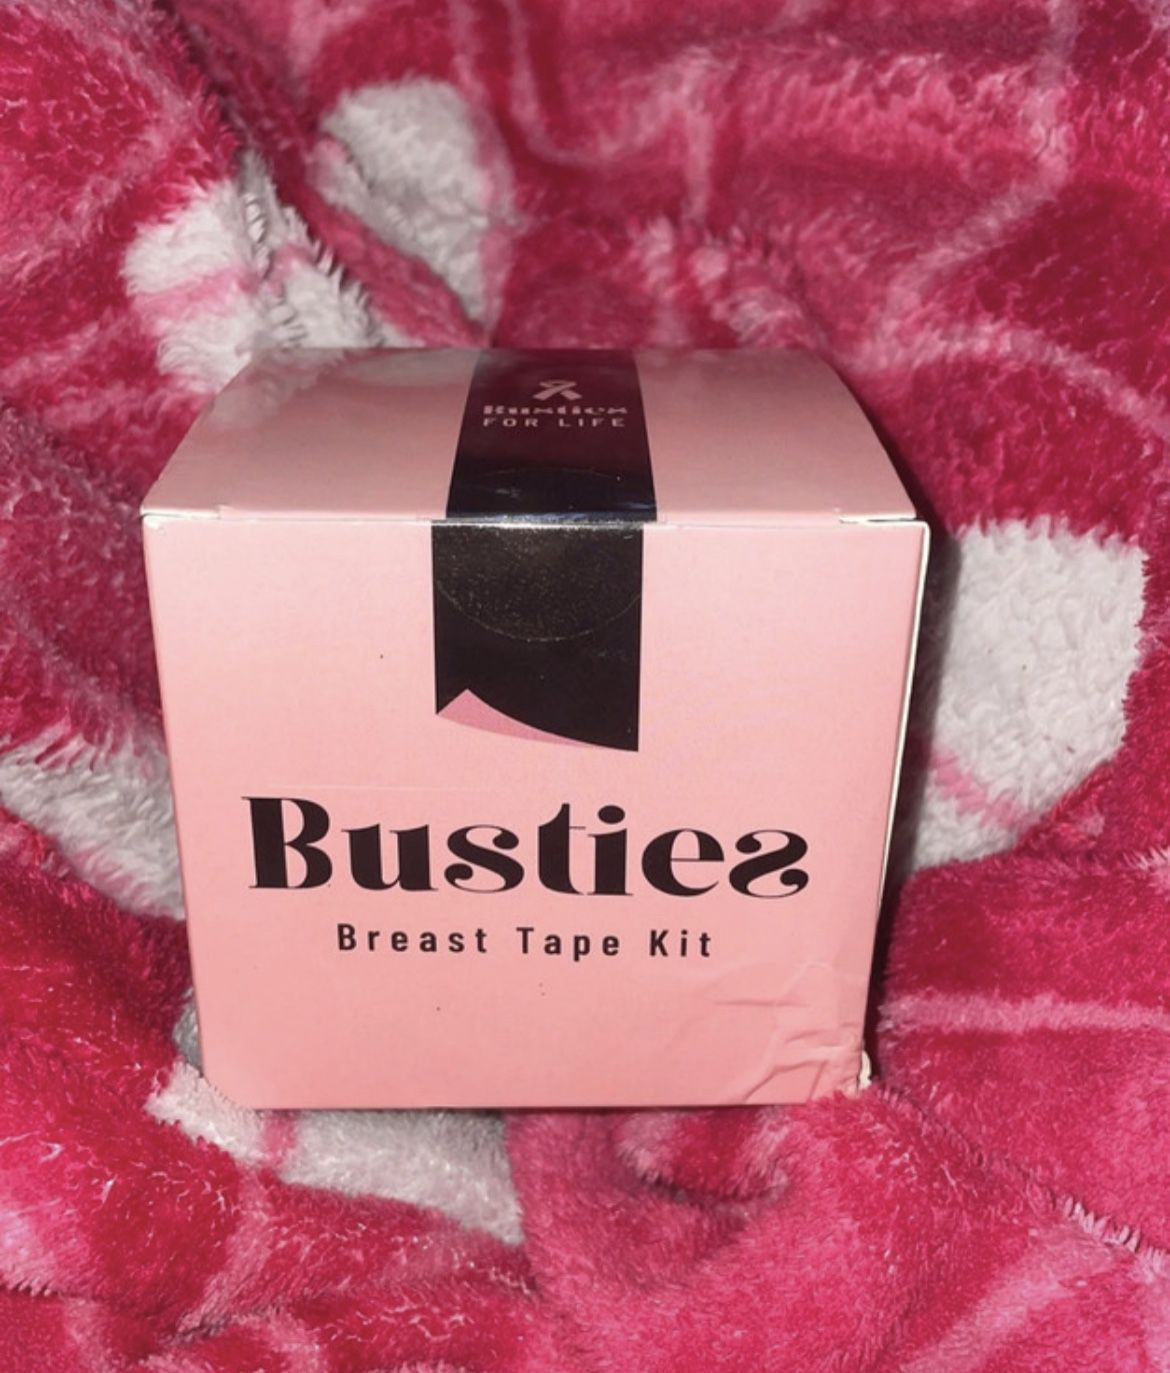 Busties Breast Tape Kit for Sale in Cypress, TX - OfferUp